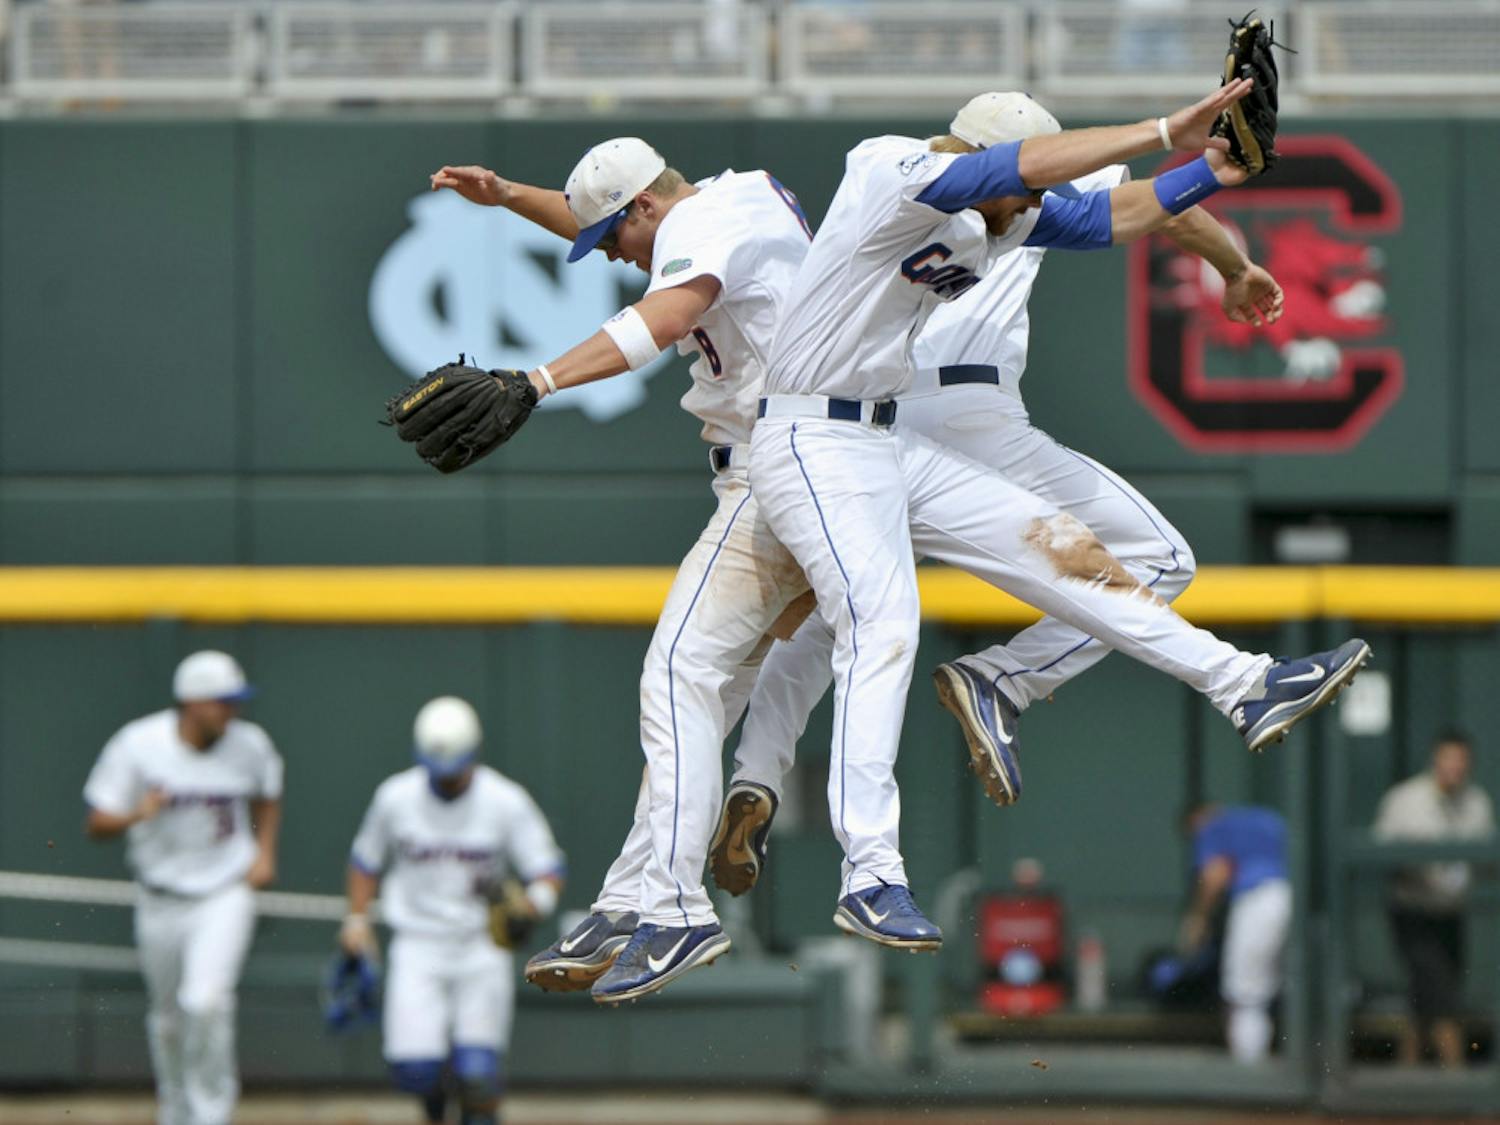 Florida beat Vanderbilt 6-4 Friday to advance to its second-ever
College World Series championship series. The Gators will play
either Virginia or South Carolina starting Monday. 